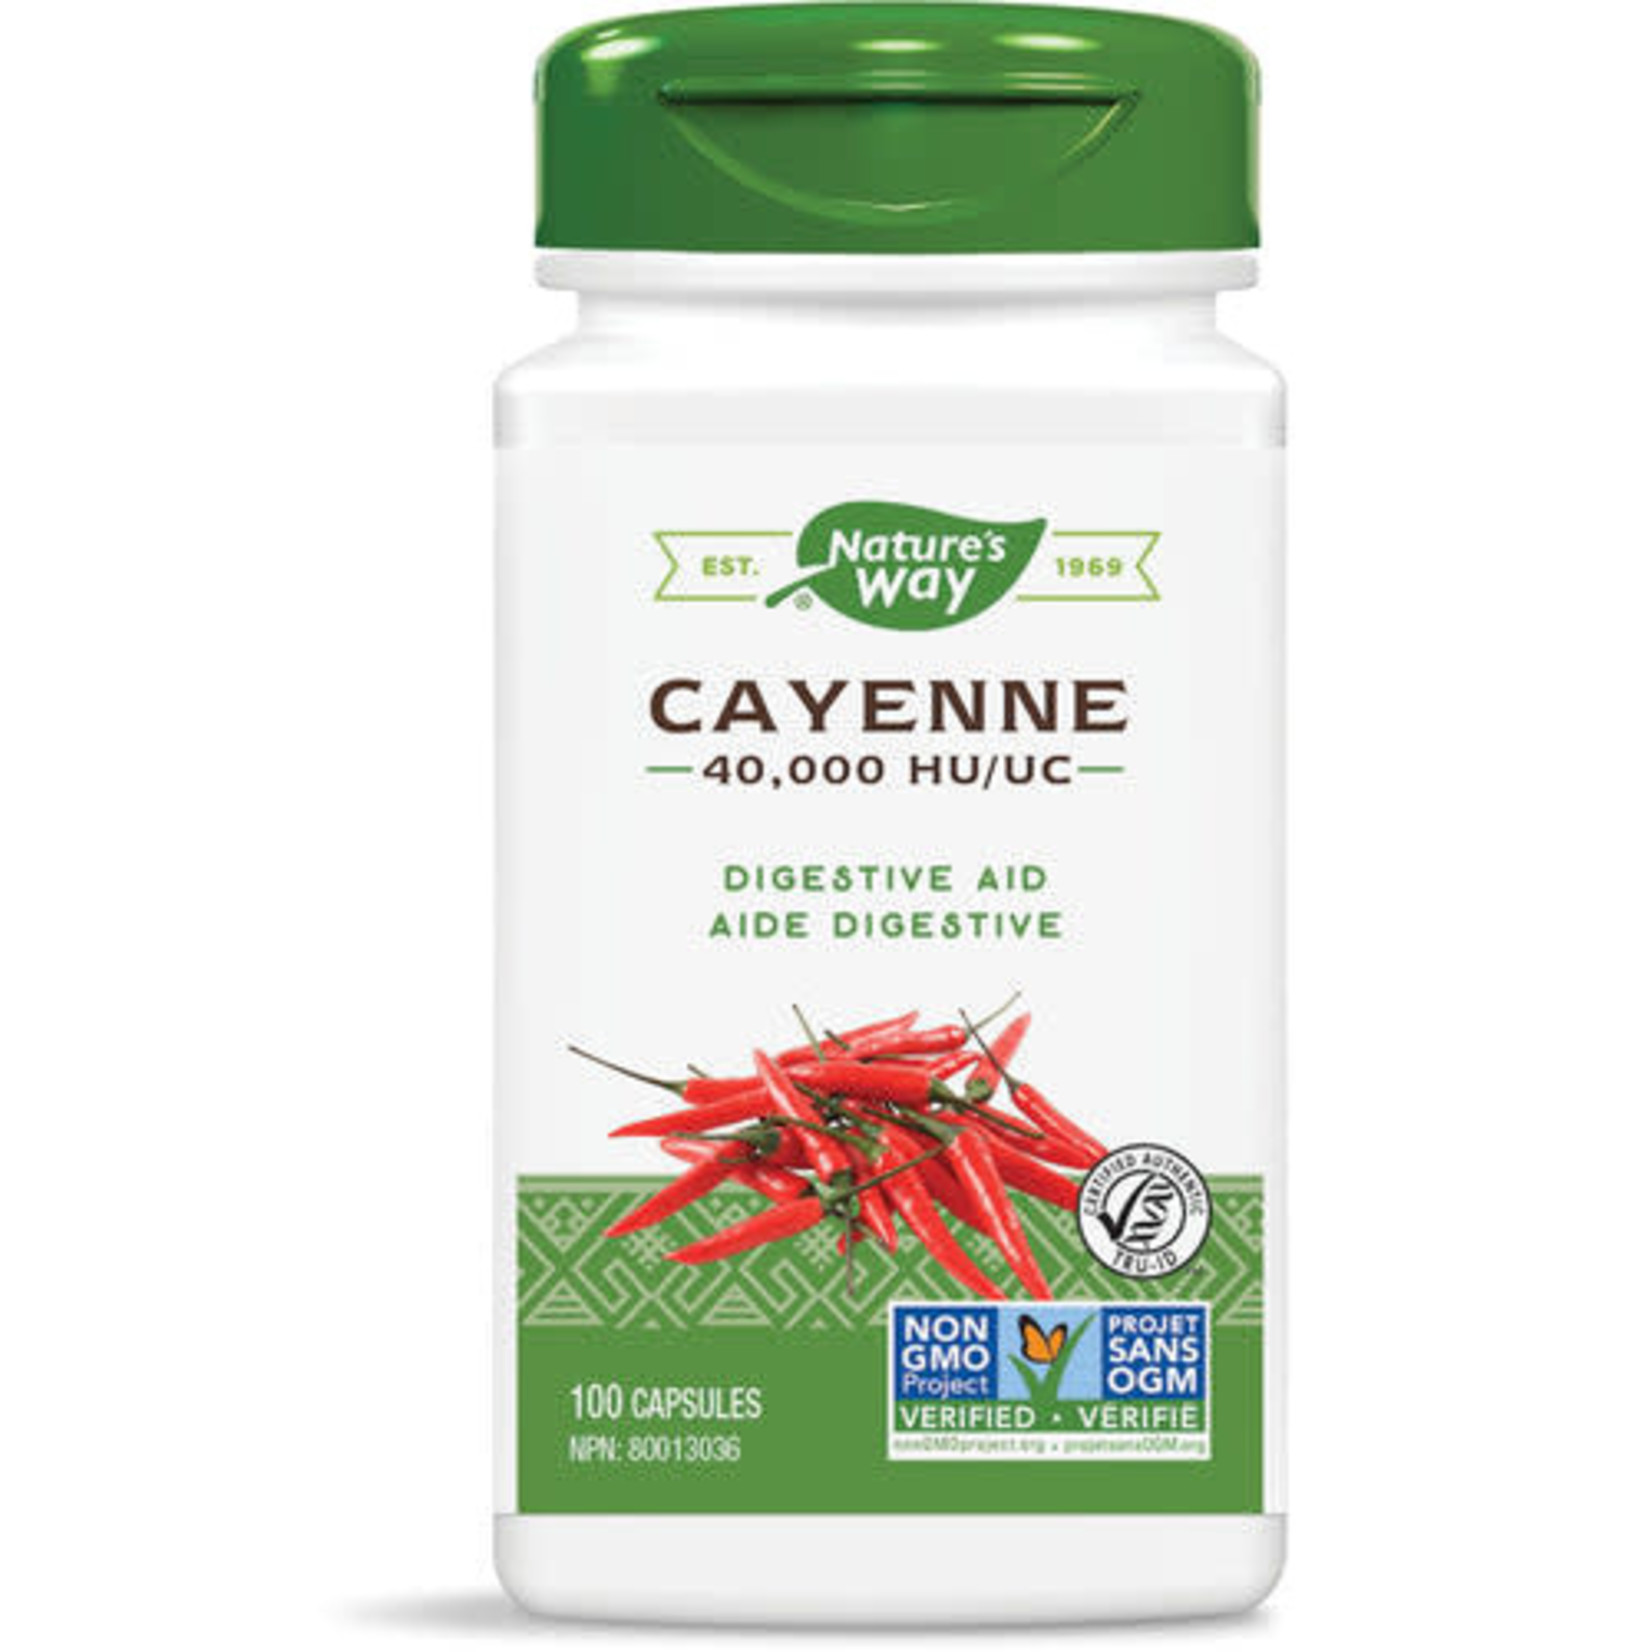 NATURES WAY NATURE'S WAY CAYENNE PEPPER 40,000 HU / 100 CAPS